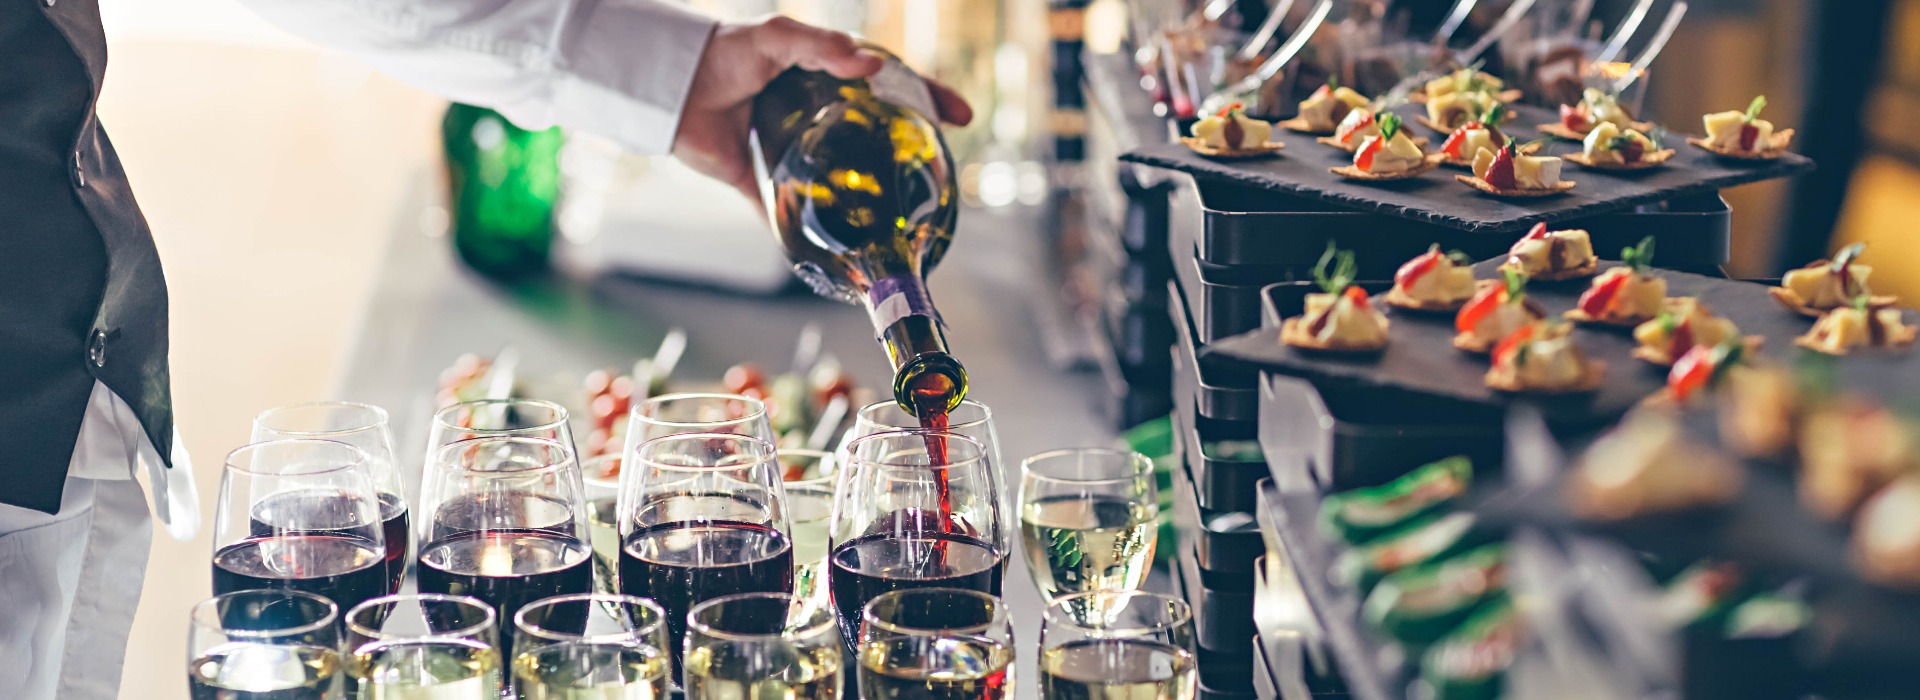 The waiter pours wine into glasses event catering concept jpg